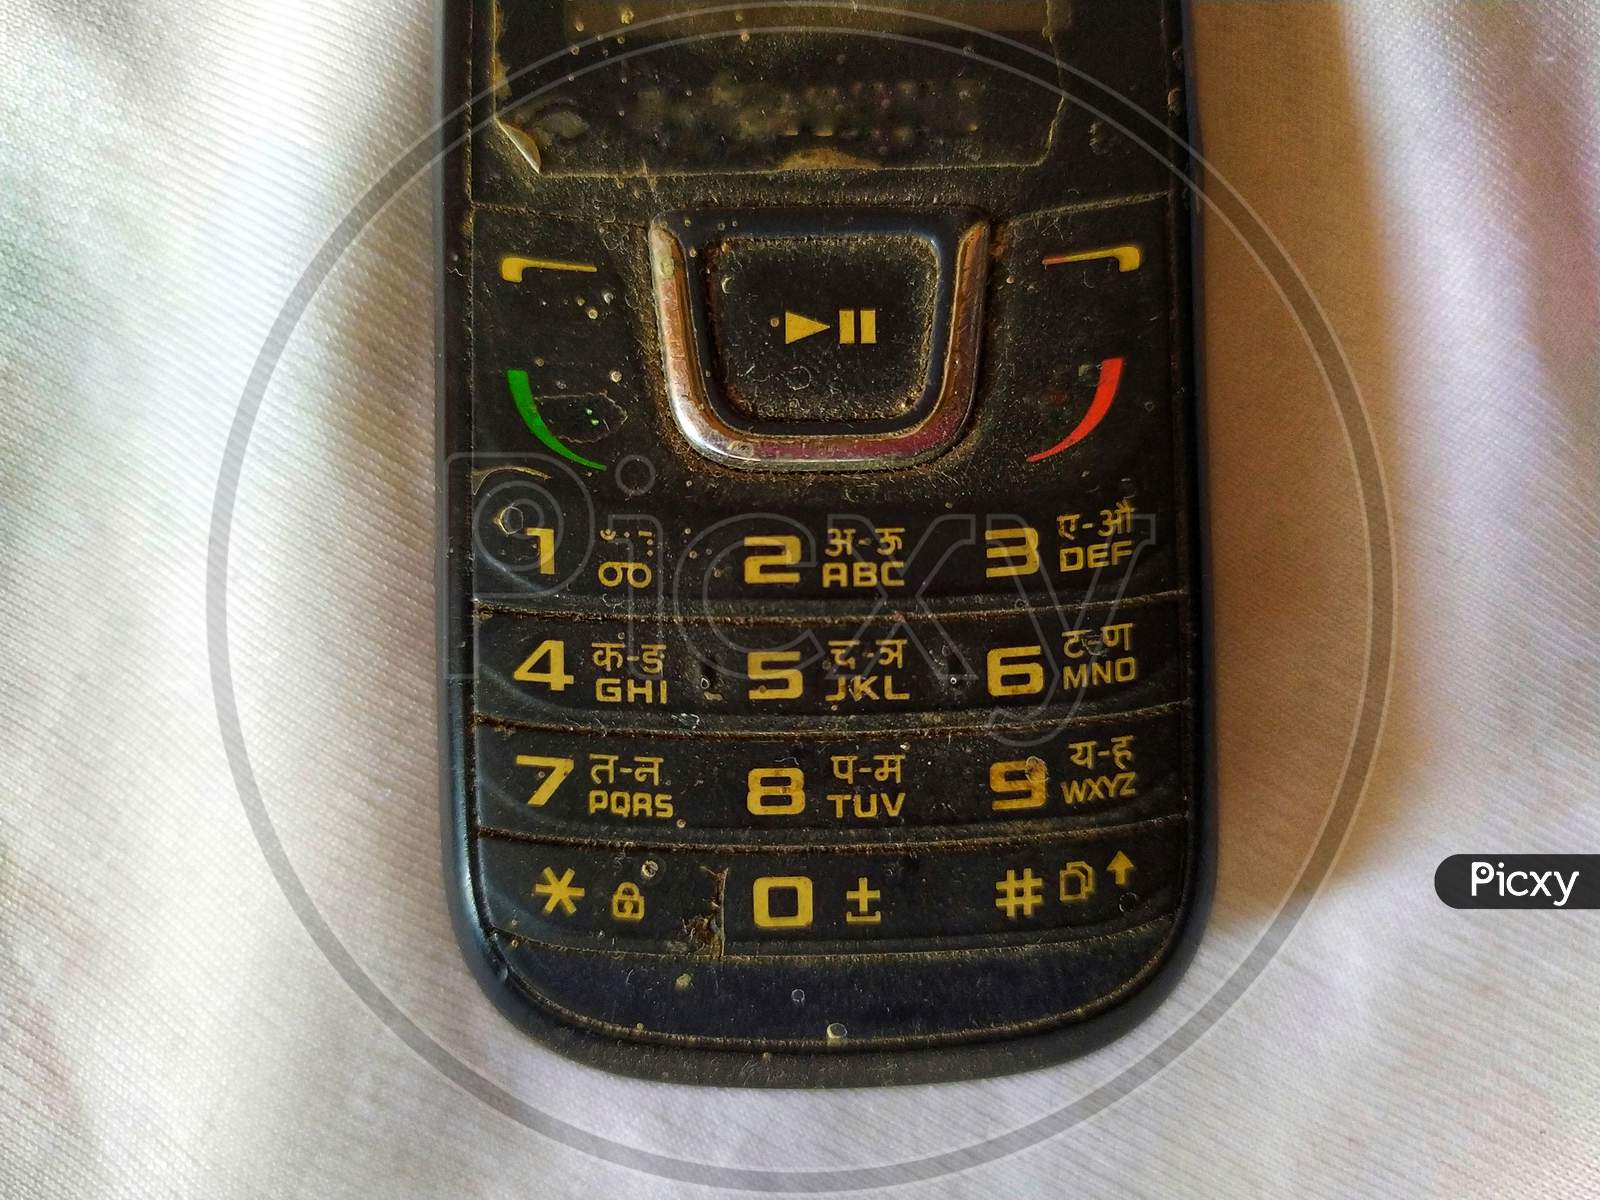 Dirty keypad of old mobile phone, with numbers and alphabets